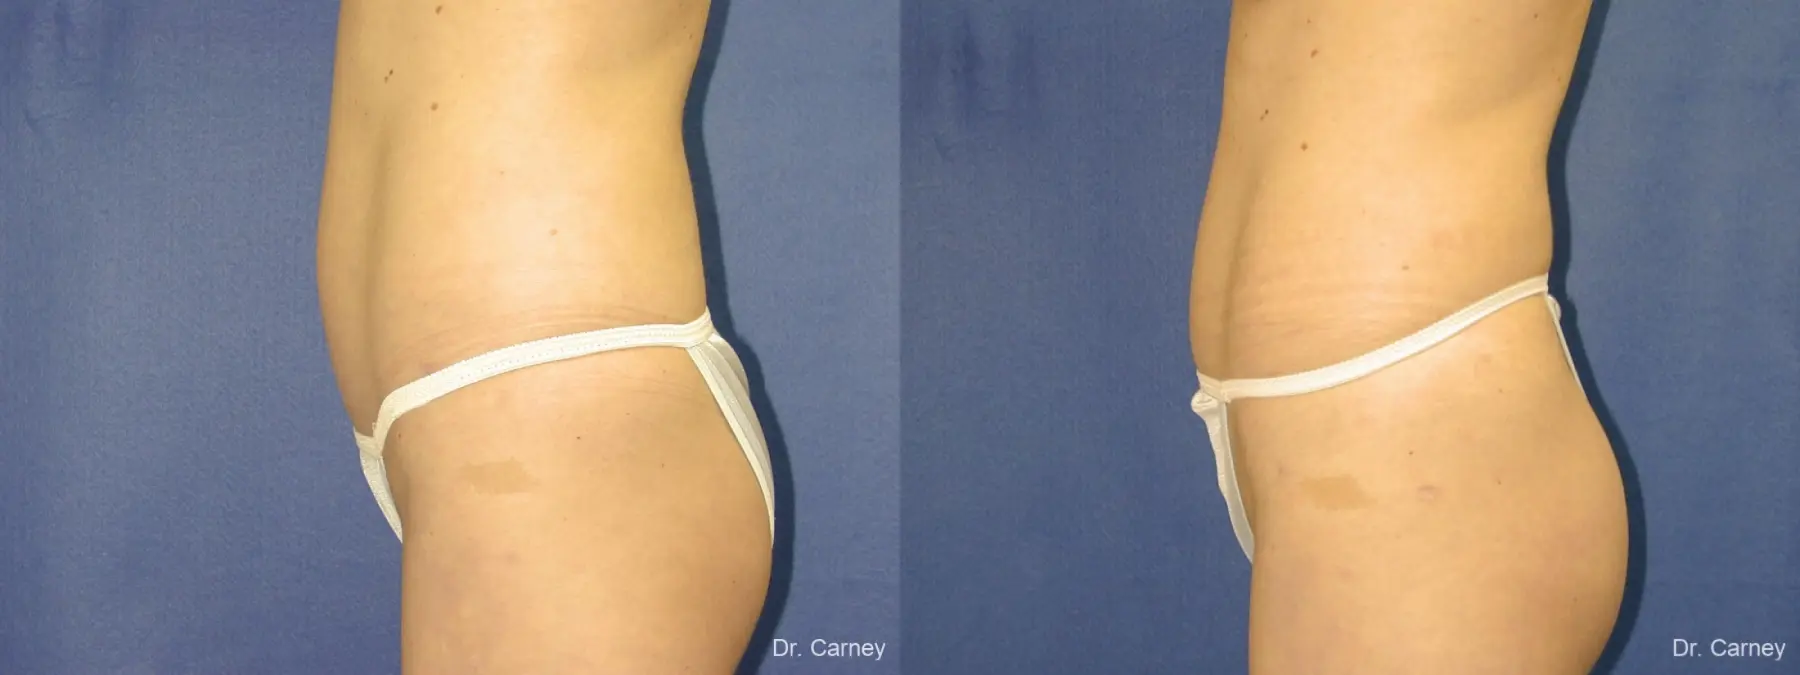 Virginia Beach Liposuction 1280 - Before and After 3